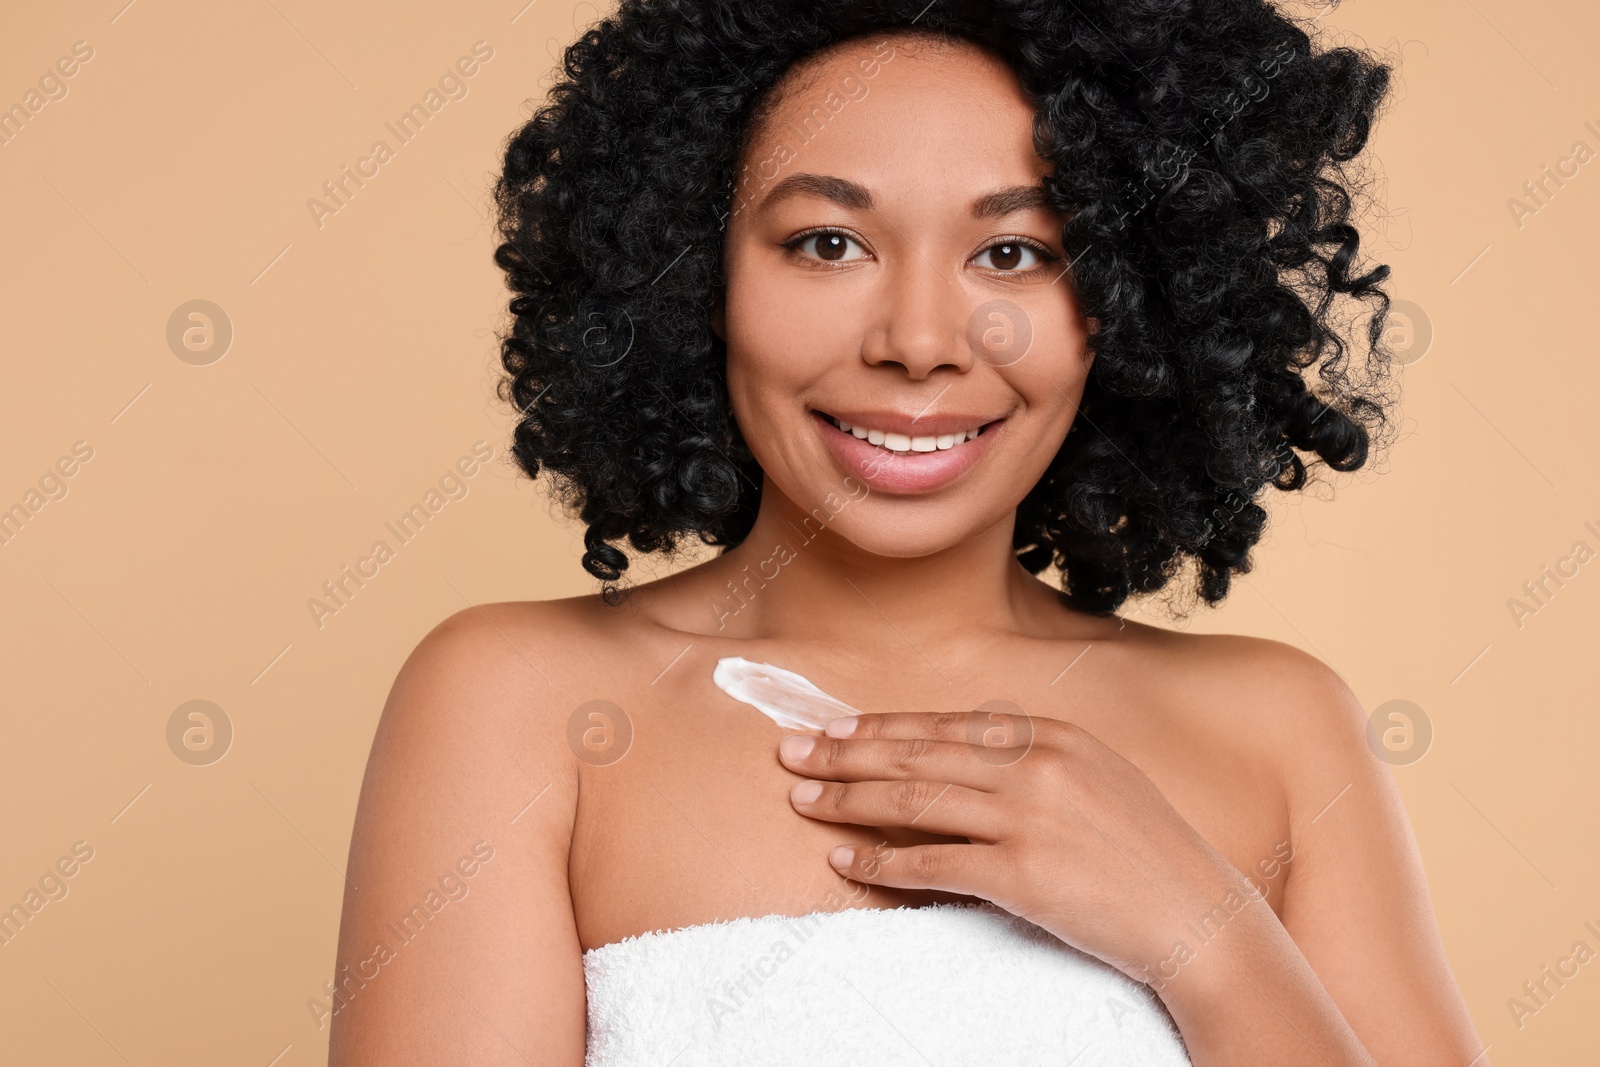 Photo of Young woman applying cream onto body on beige background